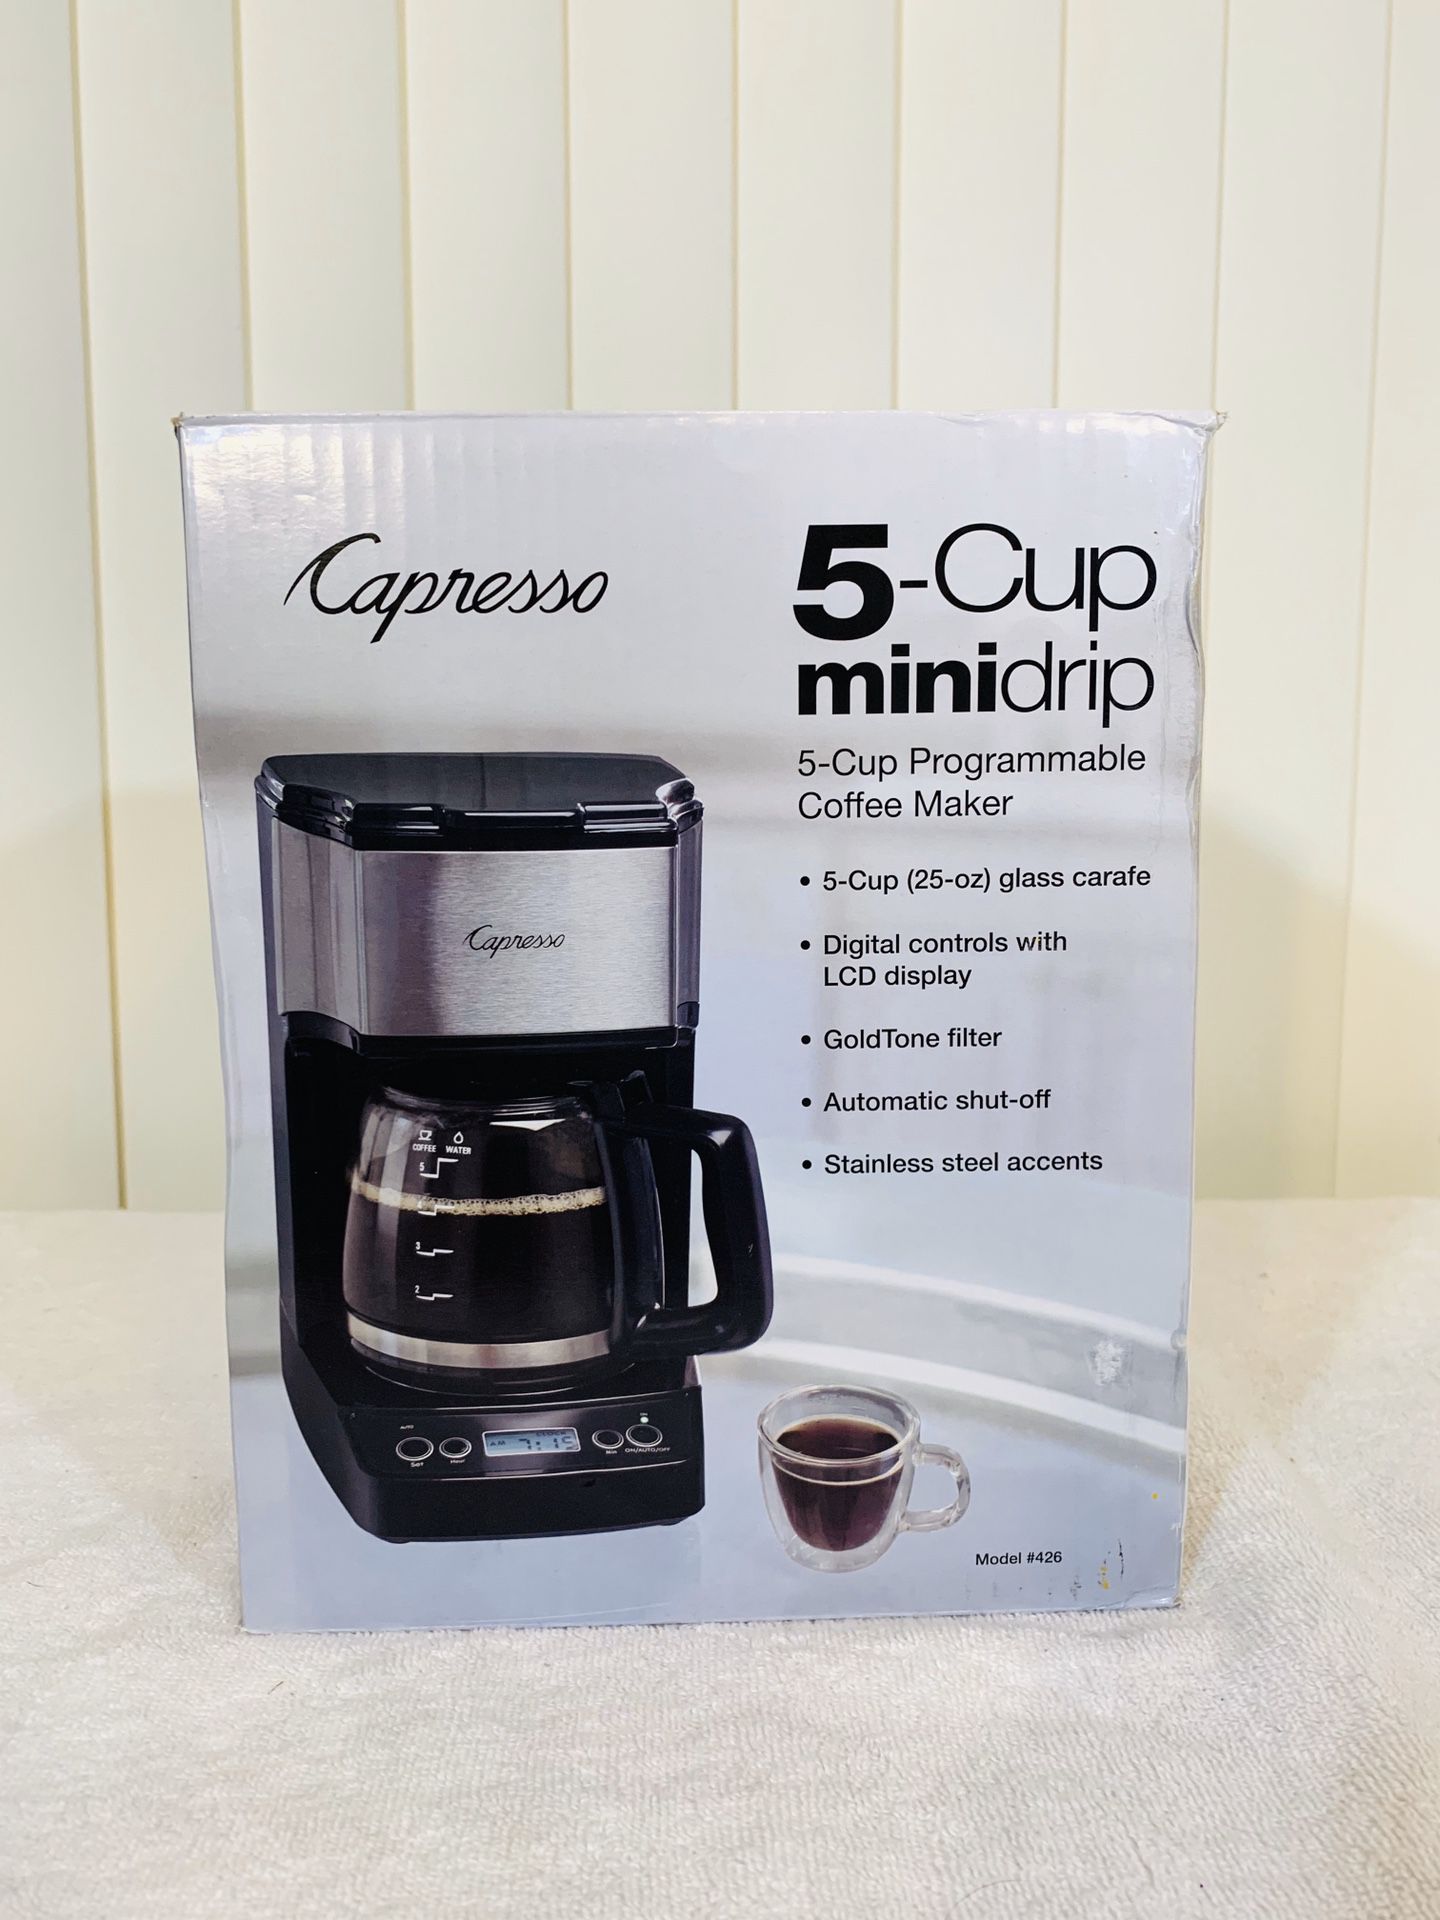 Capresso 426.05 5-Cup MINI Drip Coffee Maker, Black and Stainless Steel - Awesome 👌